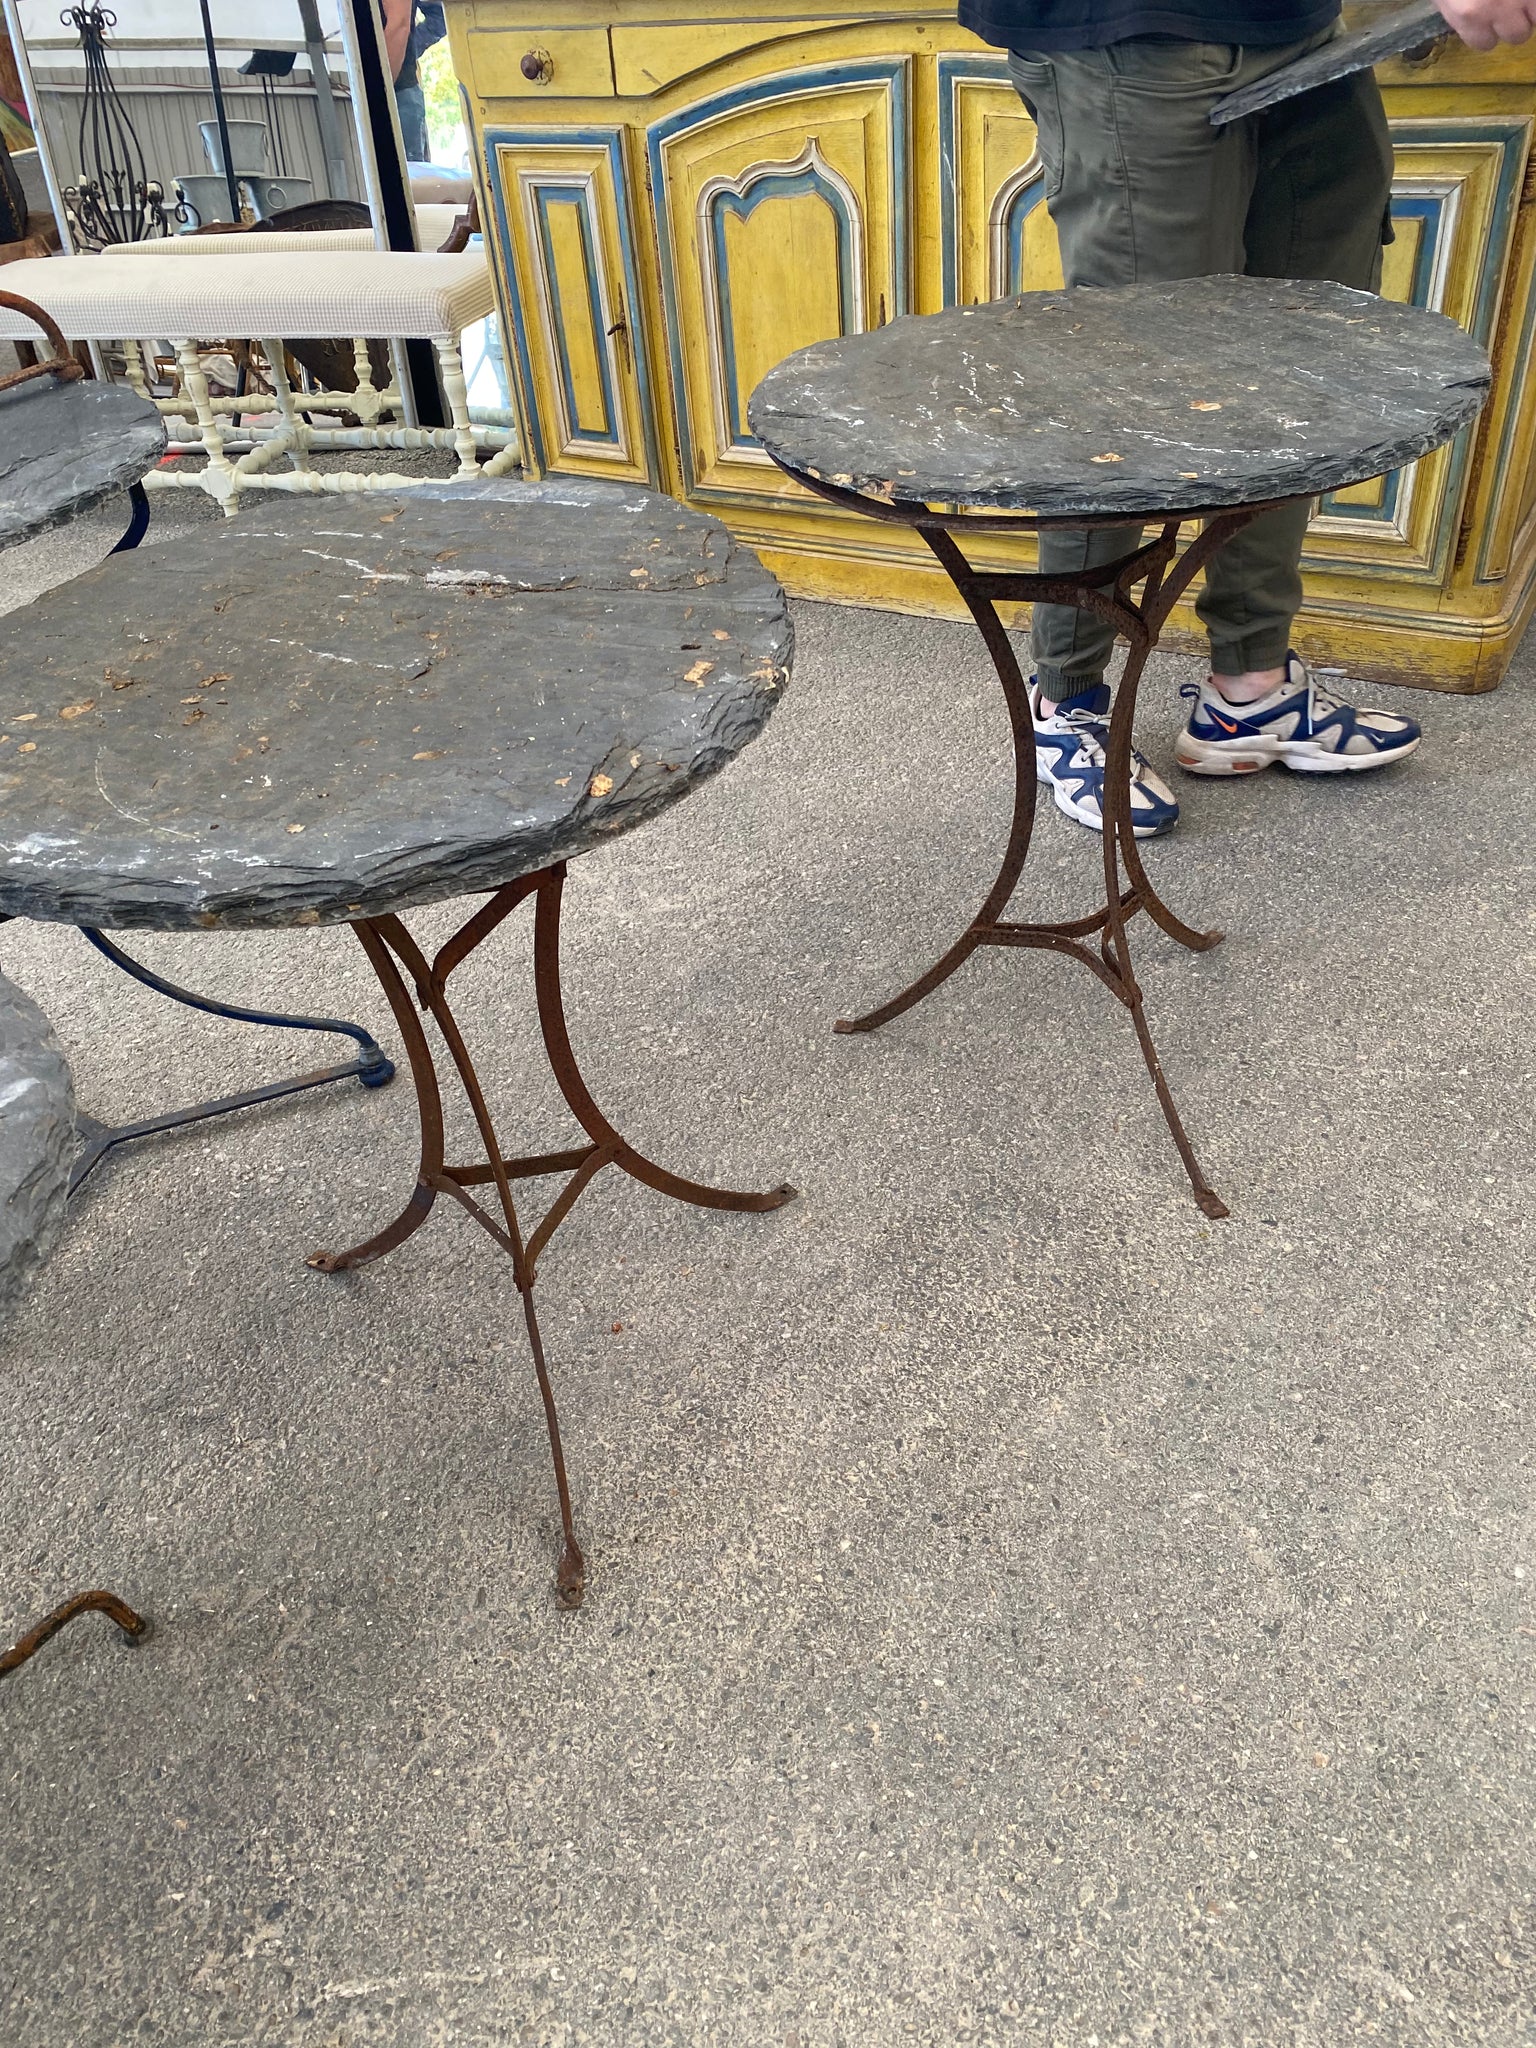 Pair French Stone Top Tables